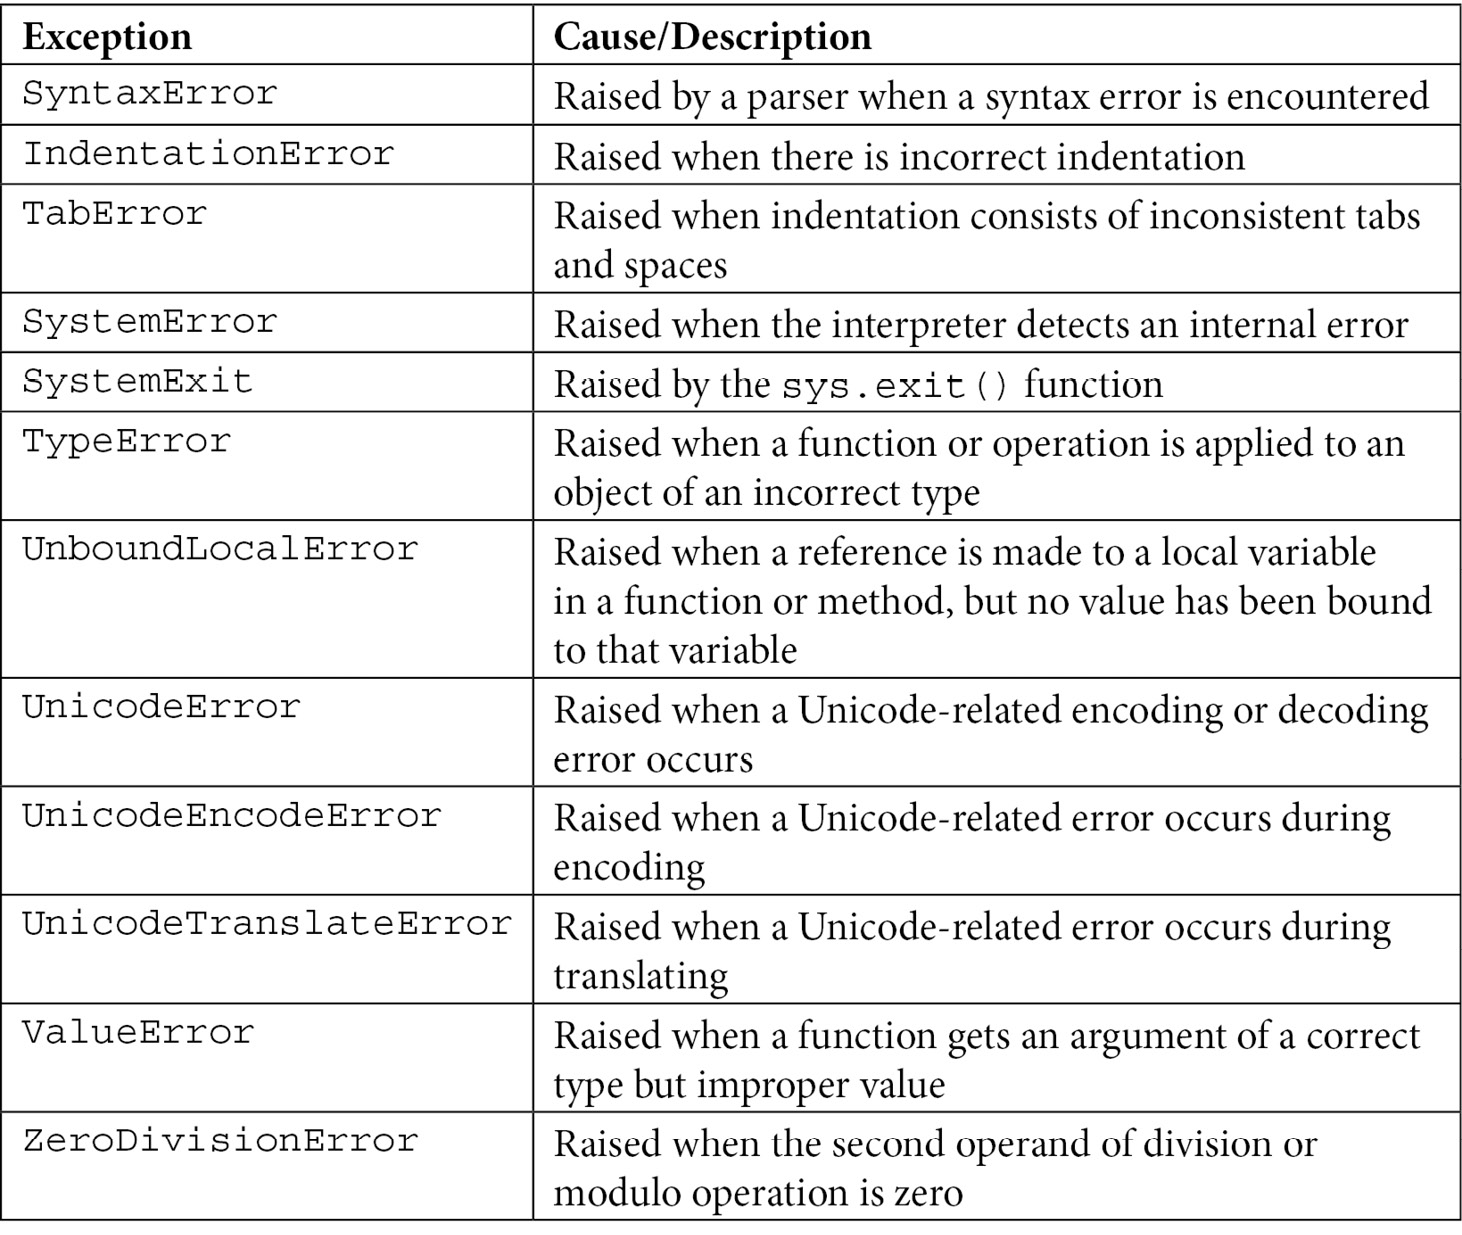 Table 7.1 - Table of exceptions and causes/descriptions
